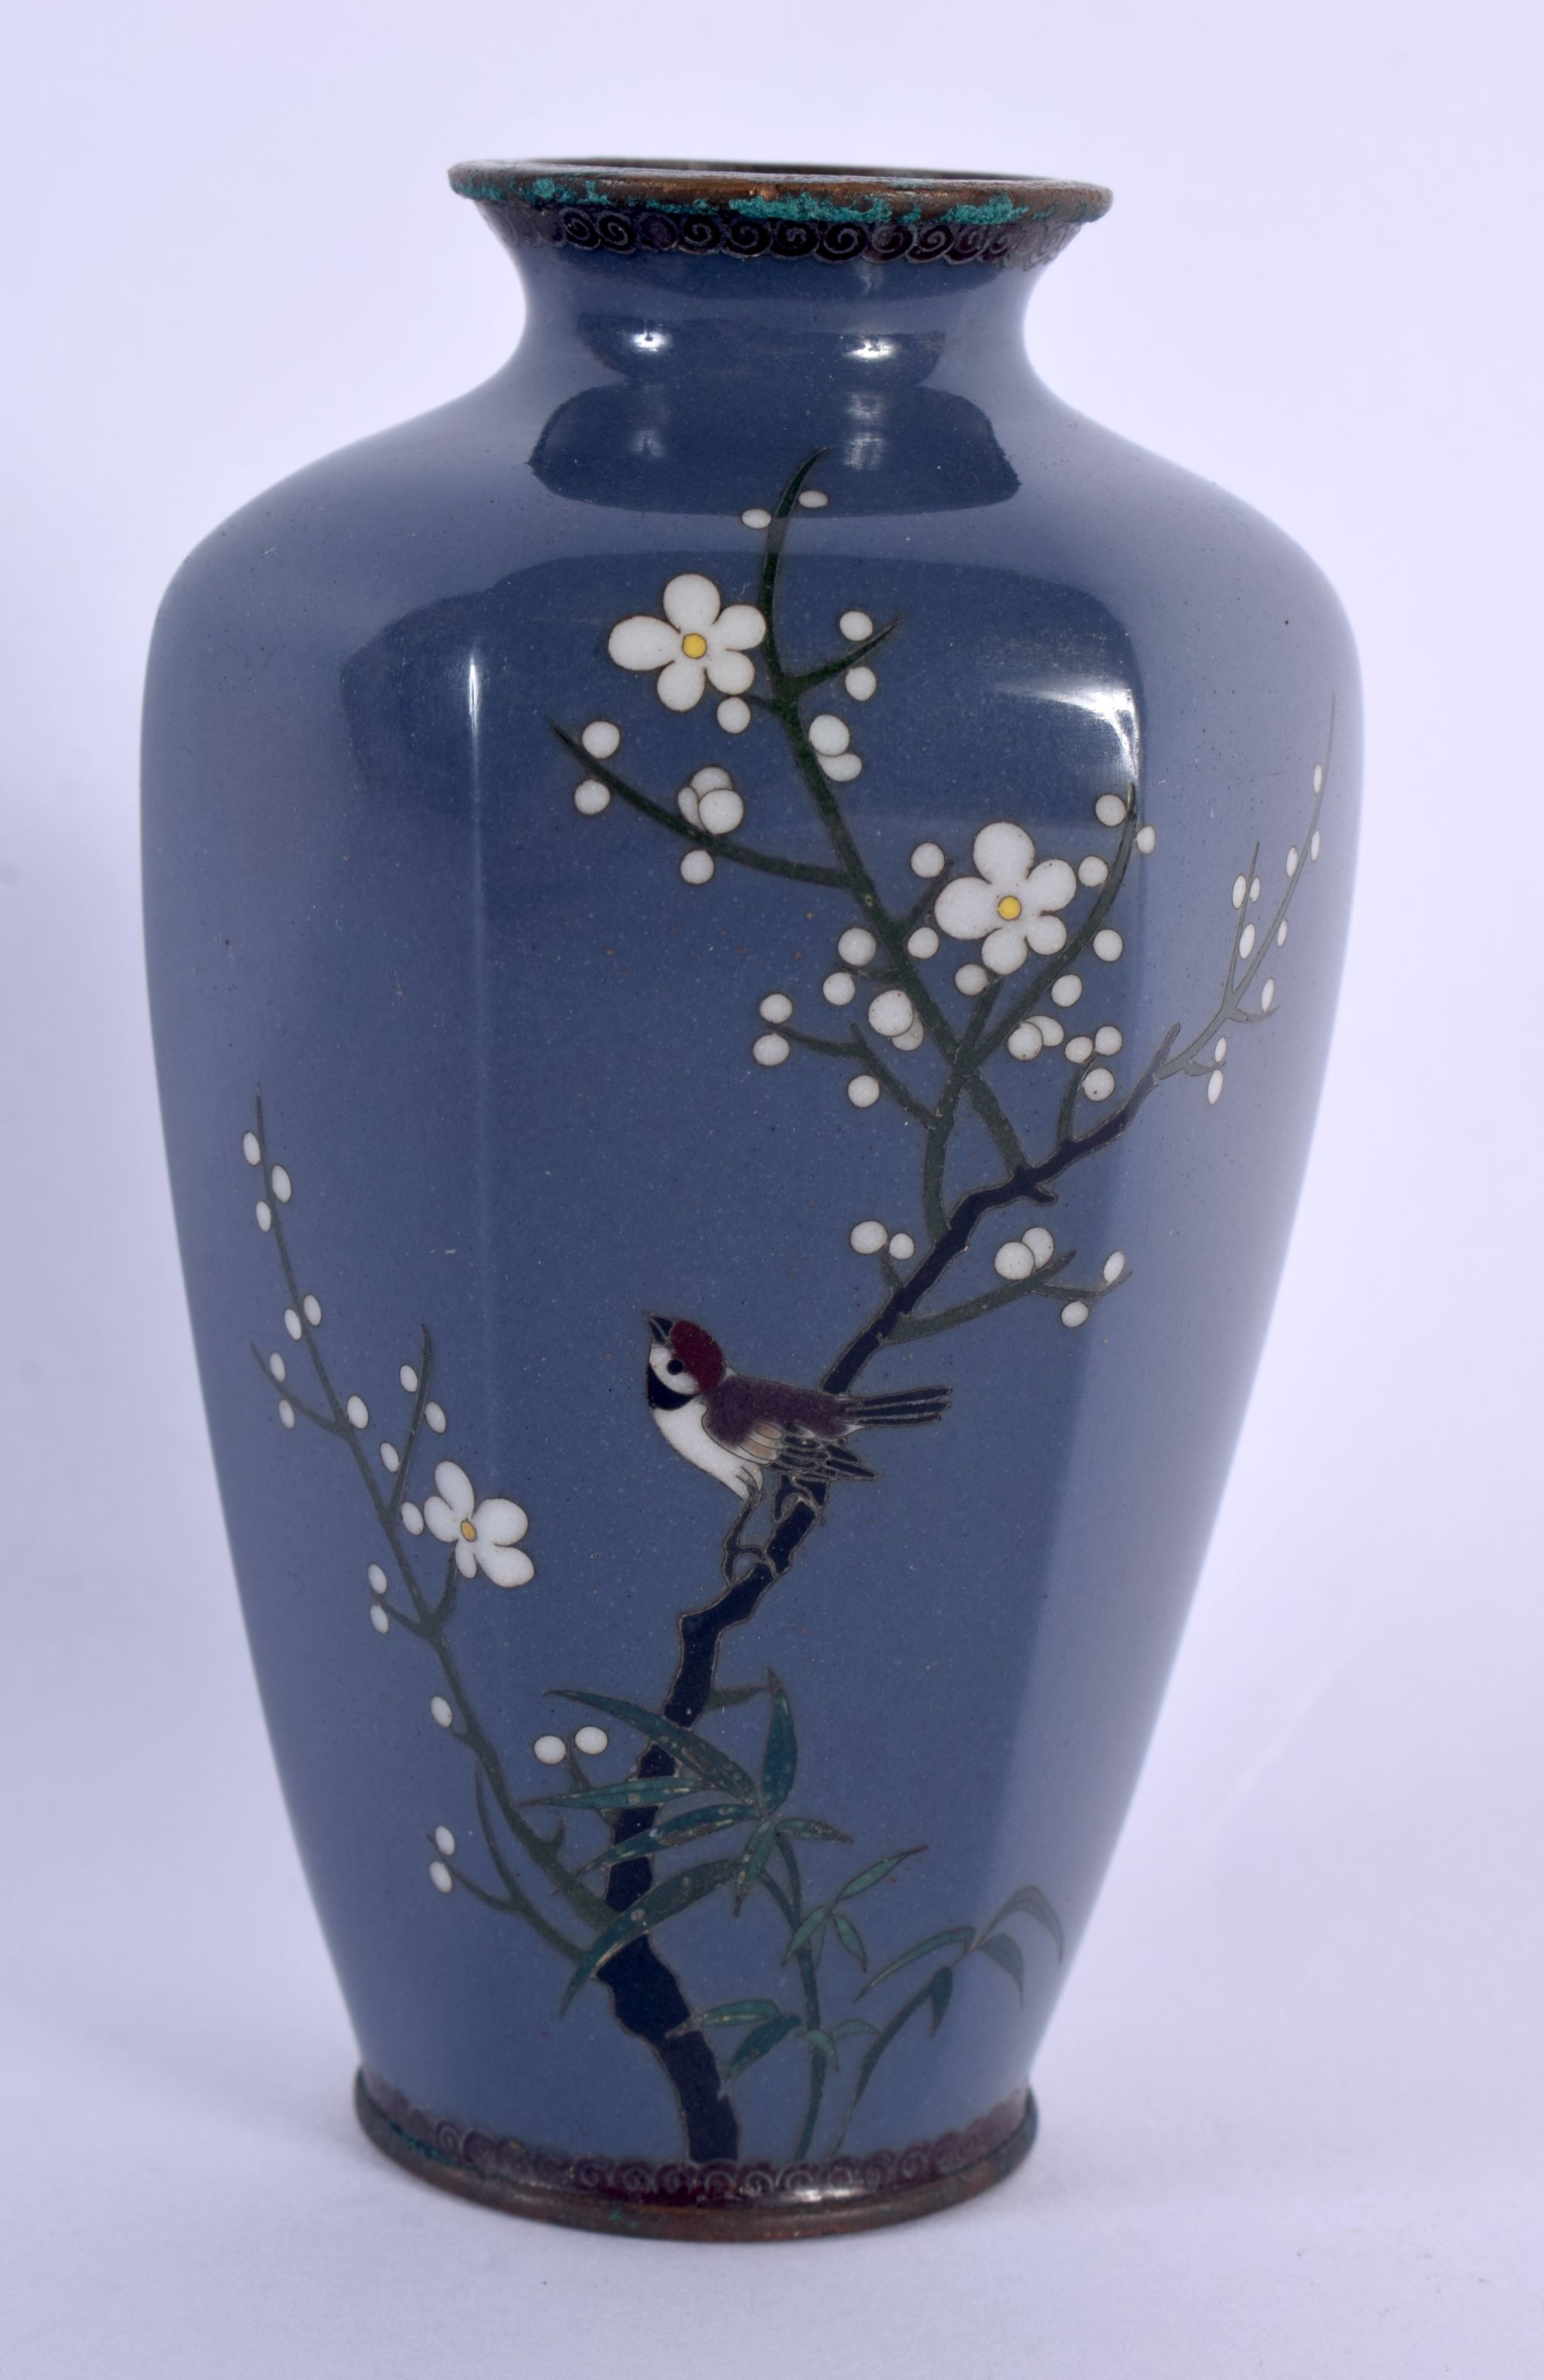 A SMALL EARLY 20TH CENTURY JAPANESE MEIJI PERIOD CLOISONNE ENAMEL VASE decorated with a bird perched